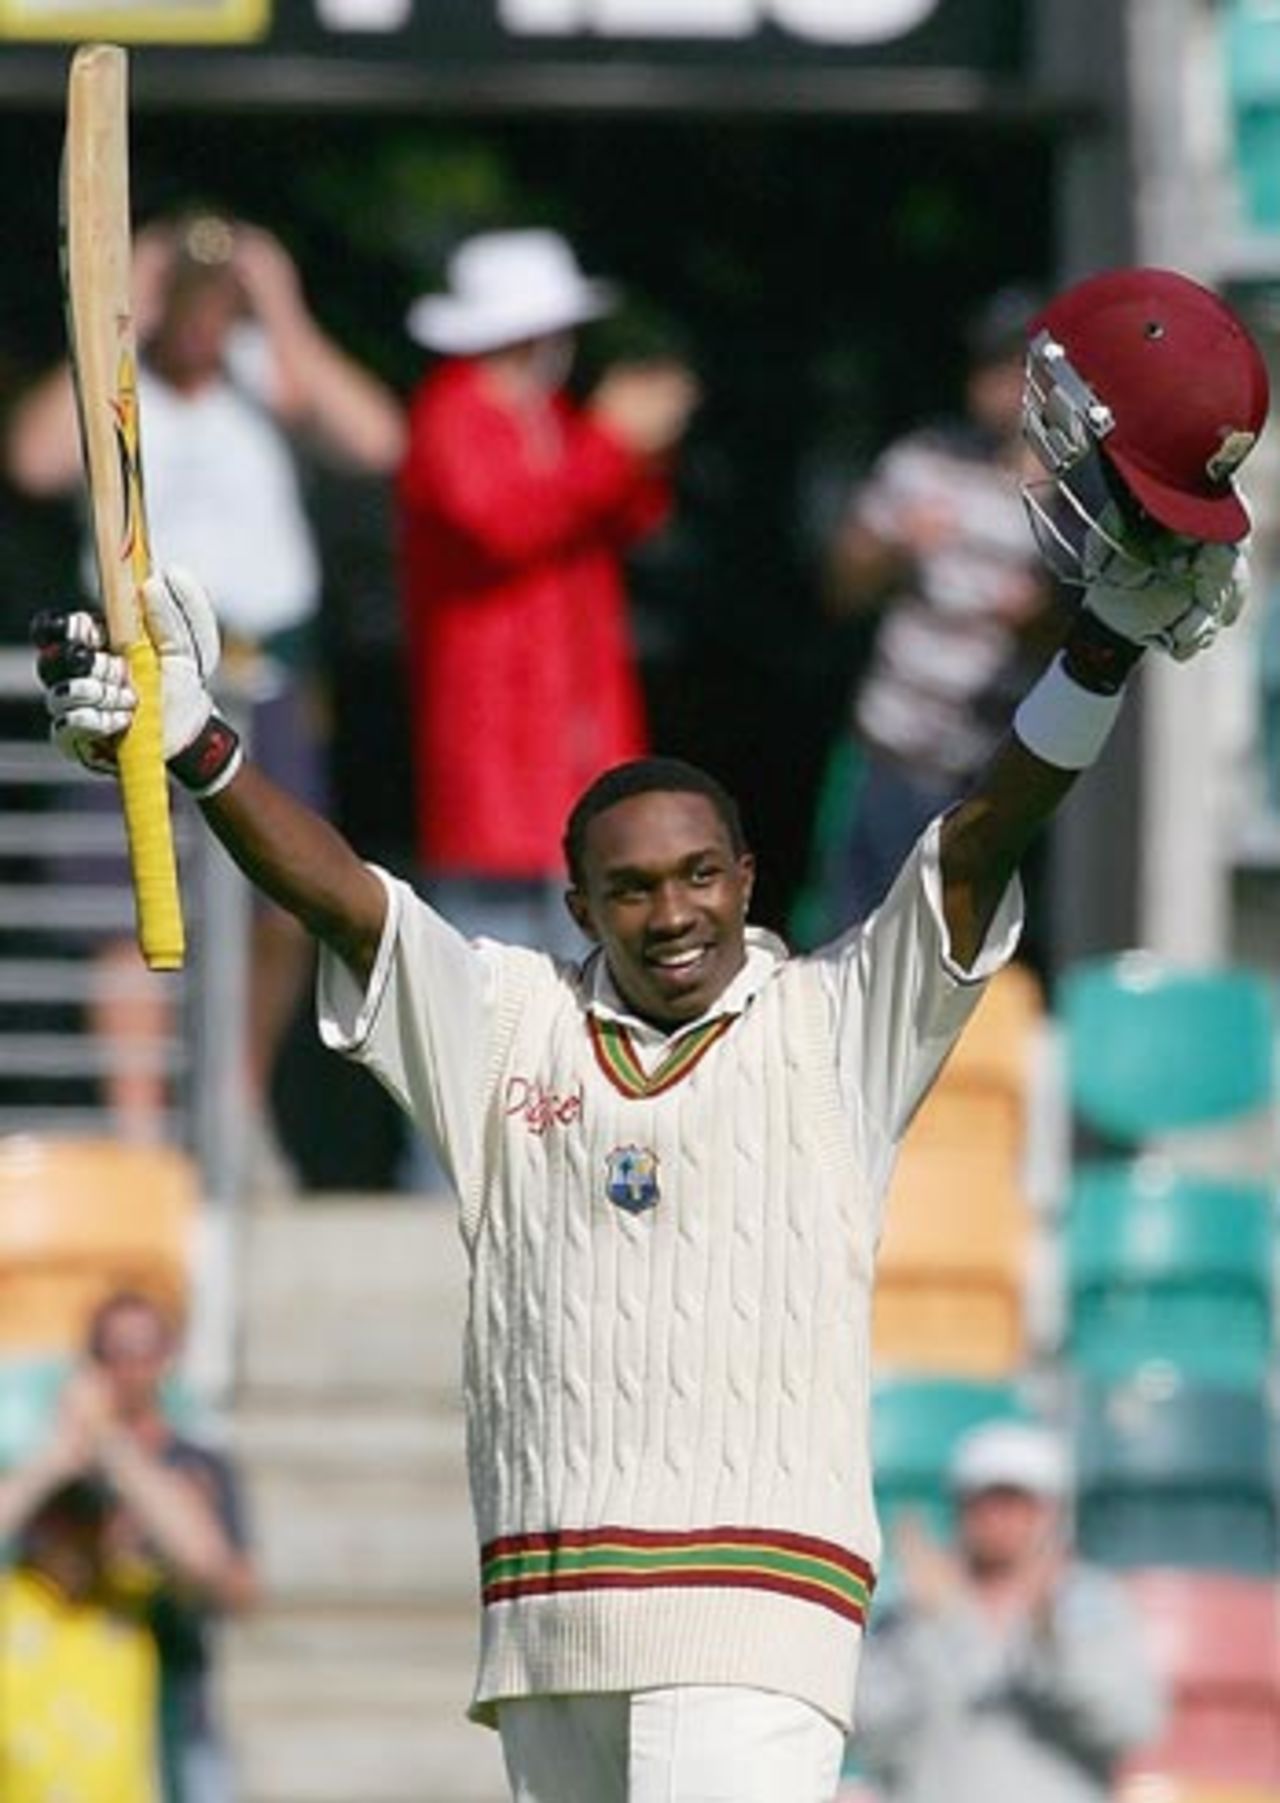 Dwayne Bravo is delighted to reach his century, Australia v West Indies, 2nd Test, Hobart, 4th day, November 20, 2005